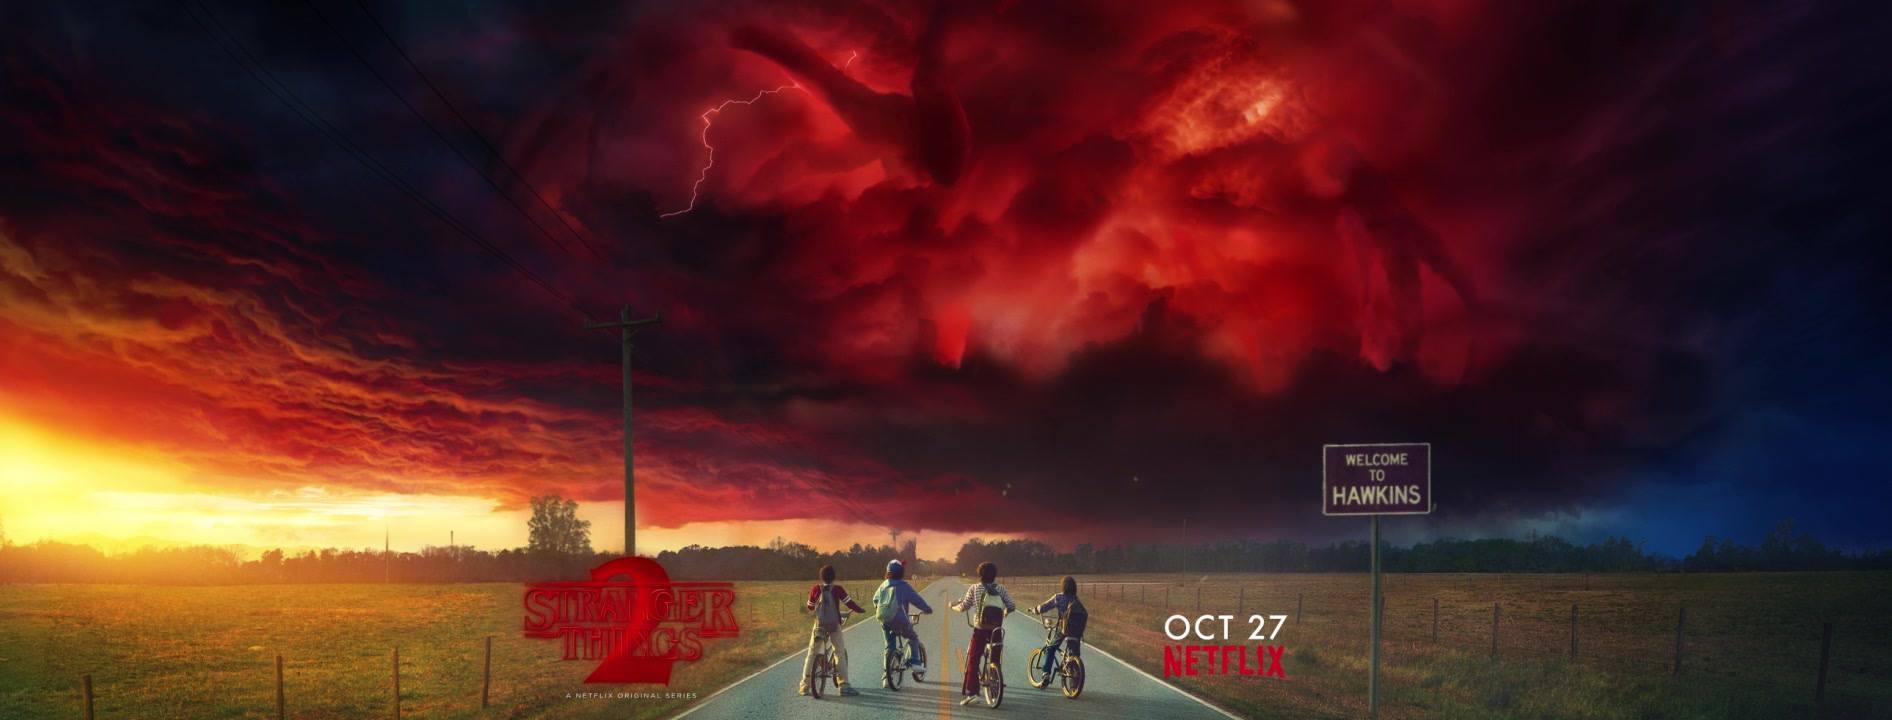 Stranger Things' Returns! Relive The Ebbs And Flows Of The Magical